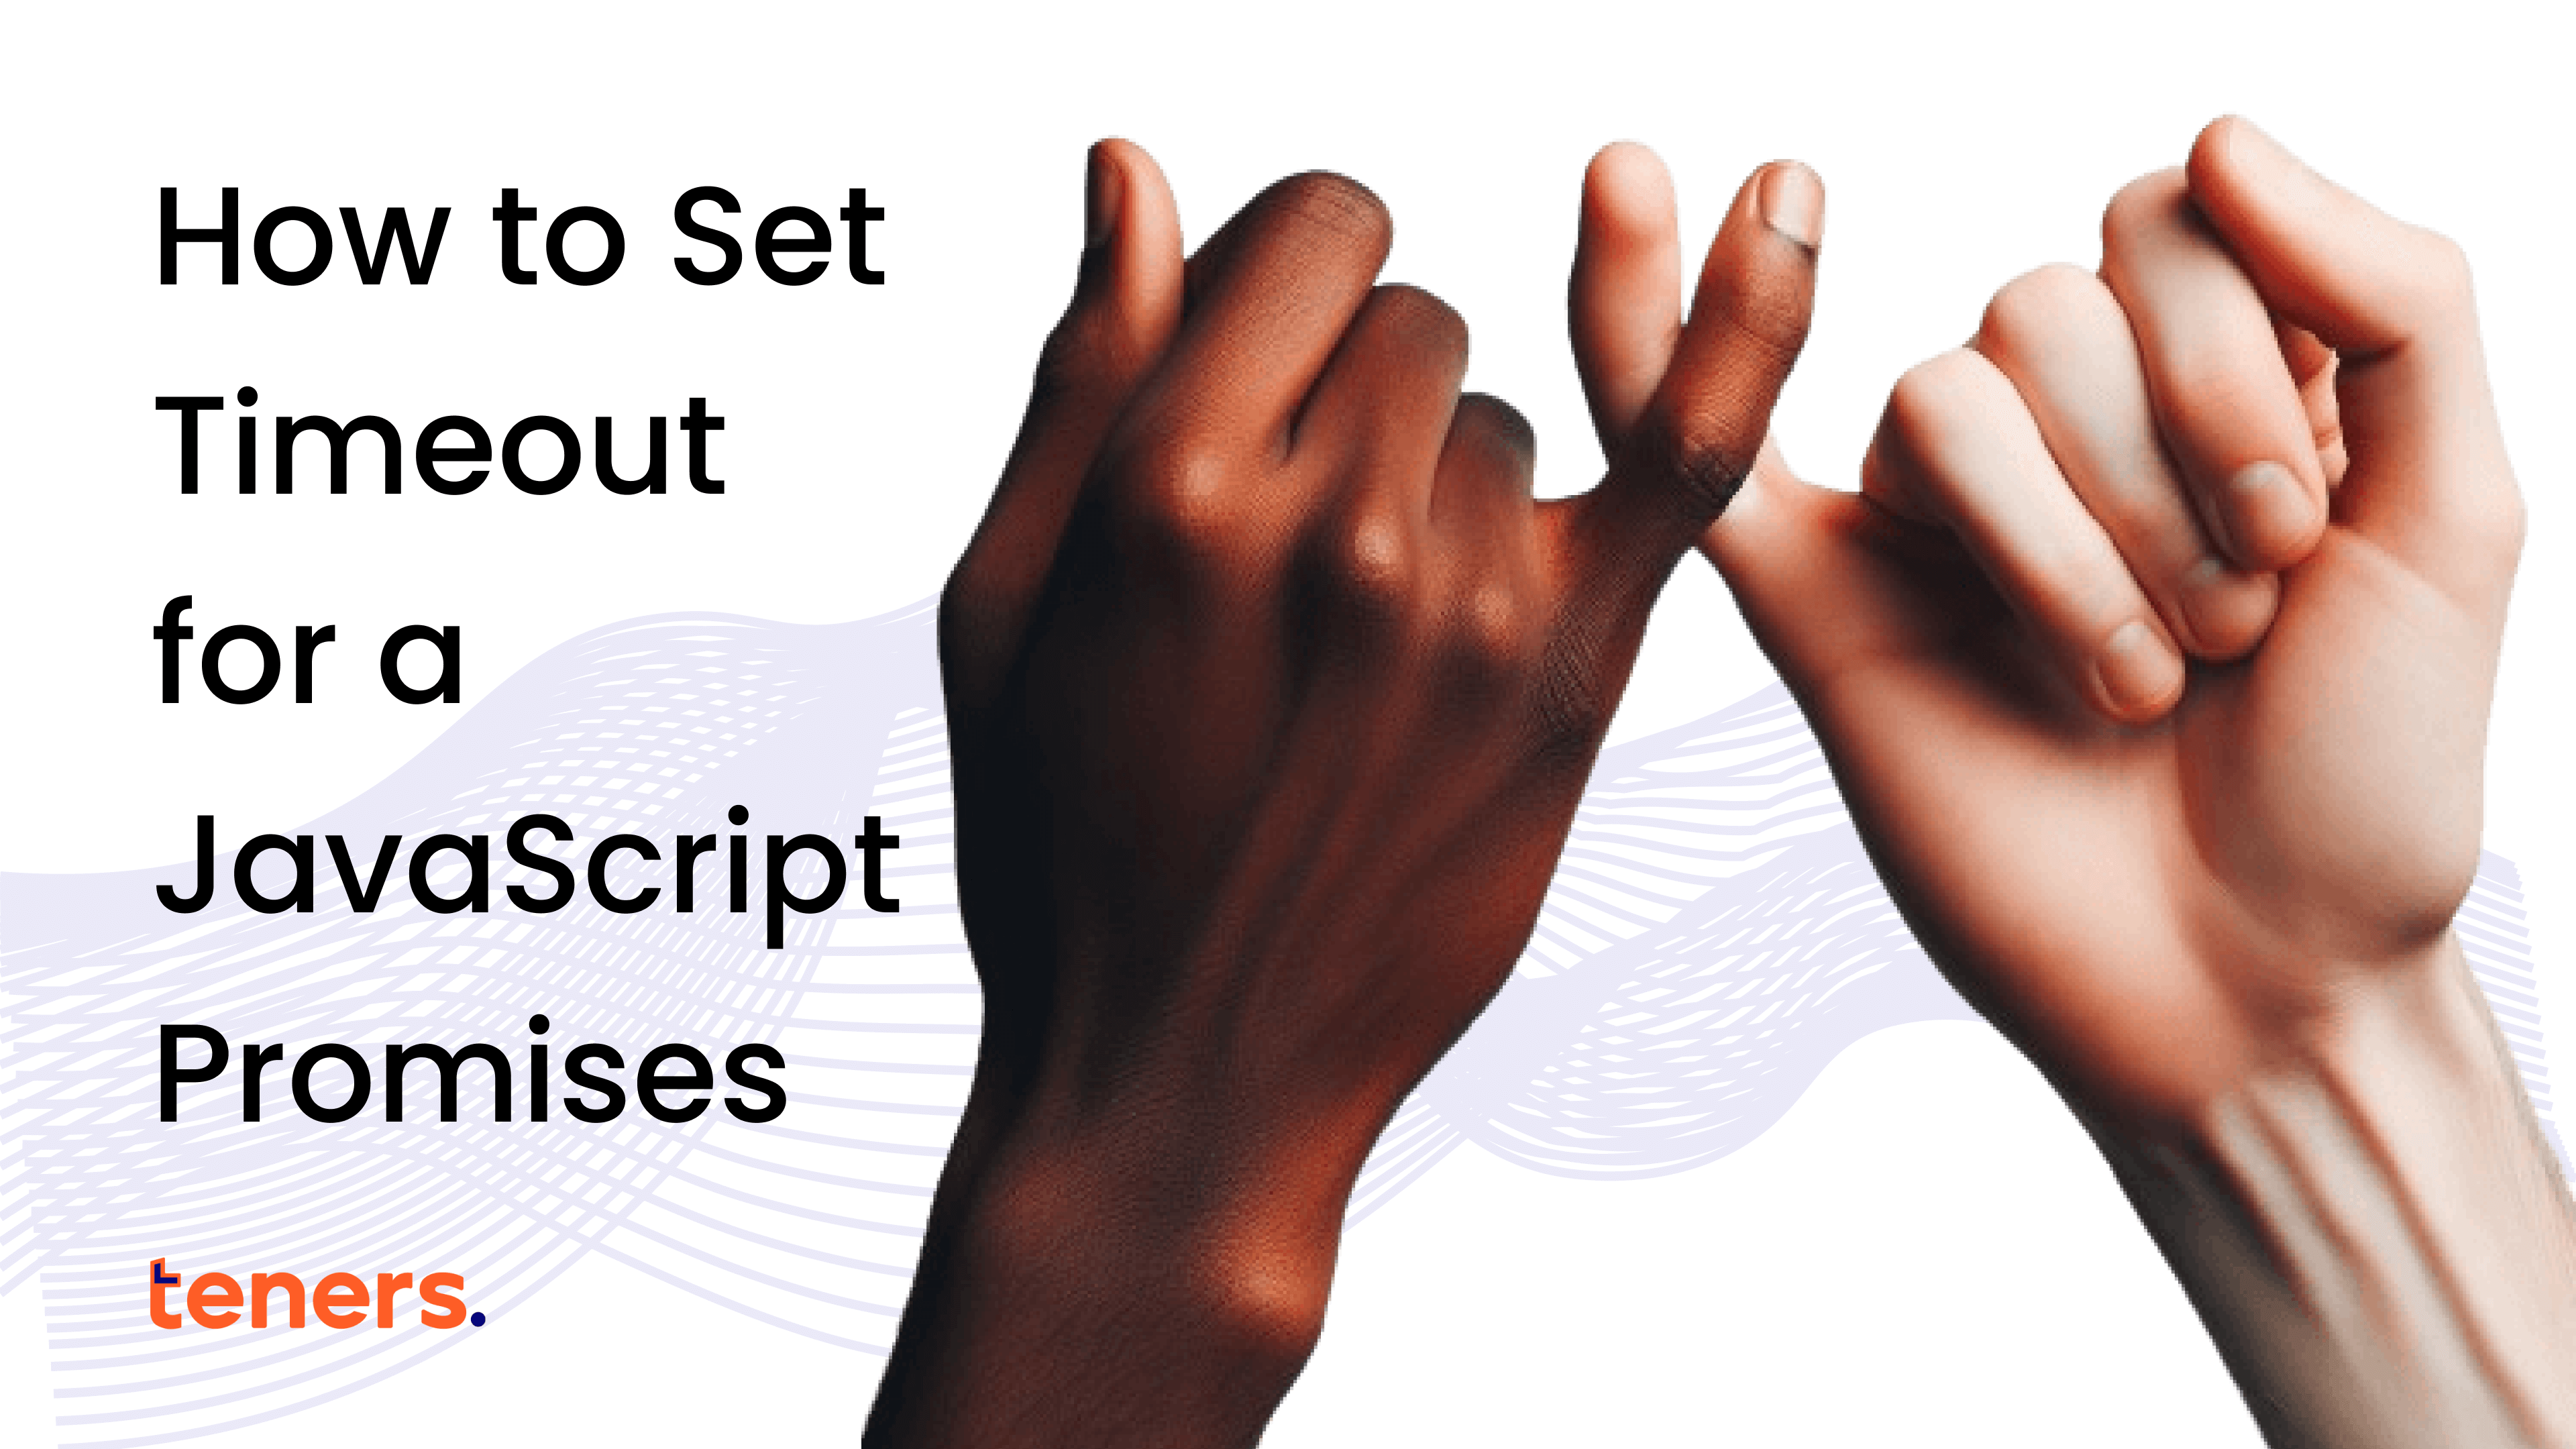 How to Set Timeout for a JavaScript Promises